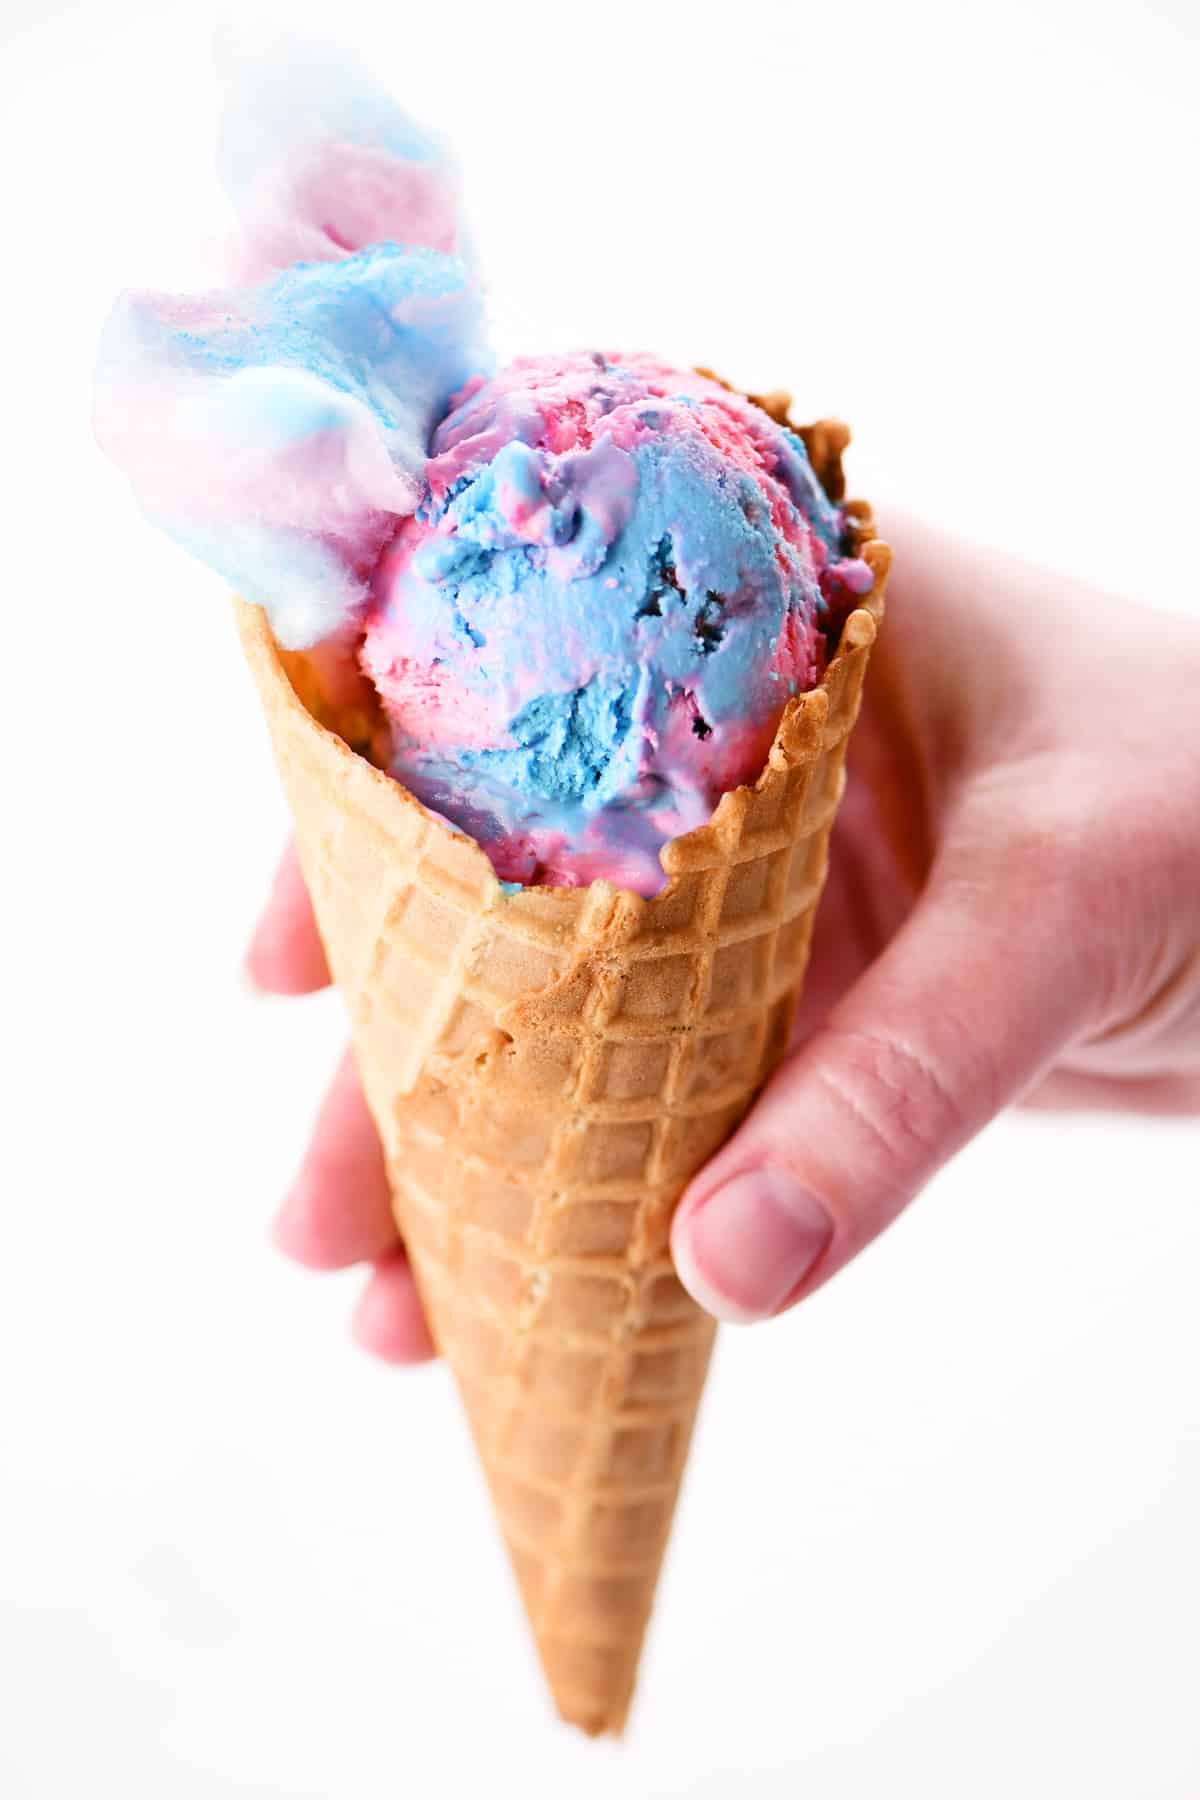 Cotton candy ice cream that is blue and pink in a waffle cone.